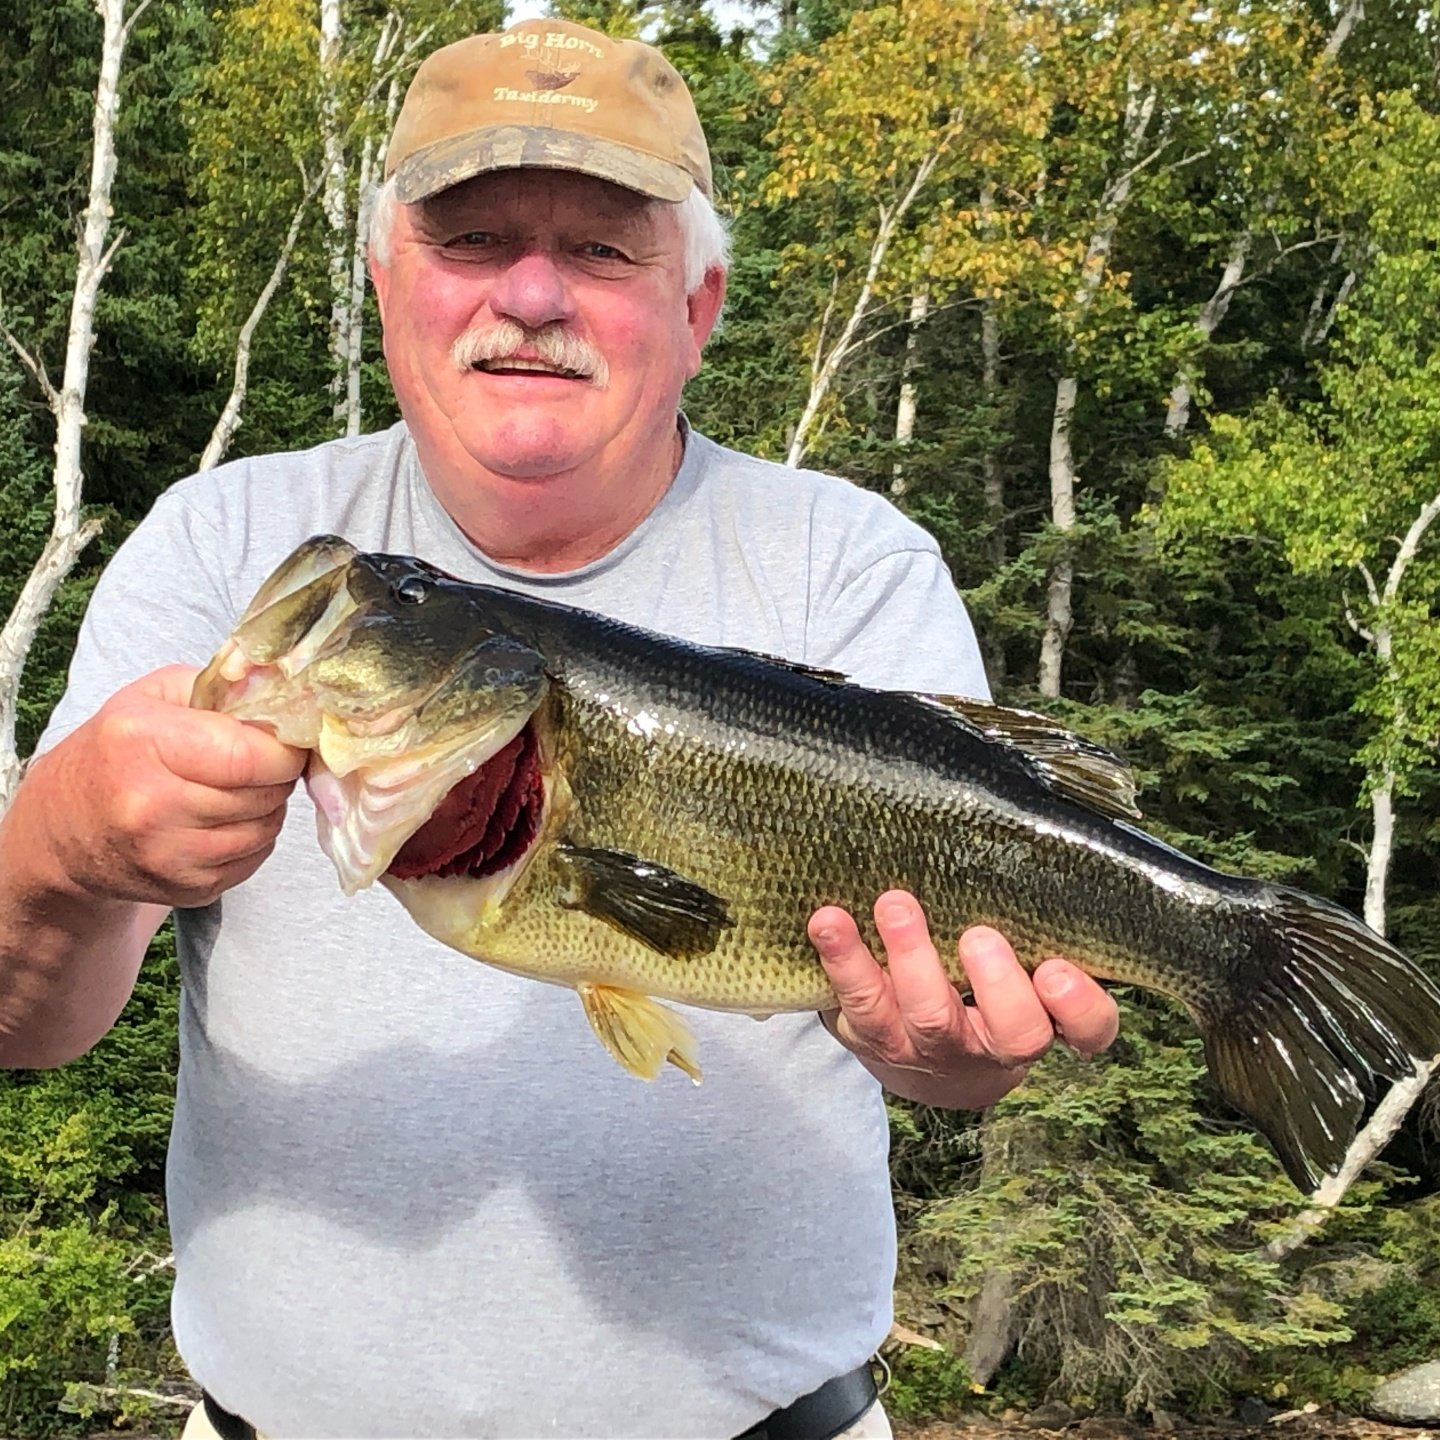 A man is holding a large bass in his hands.